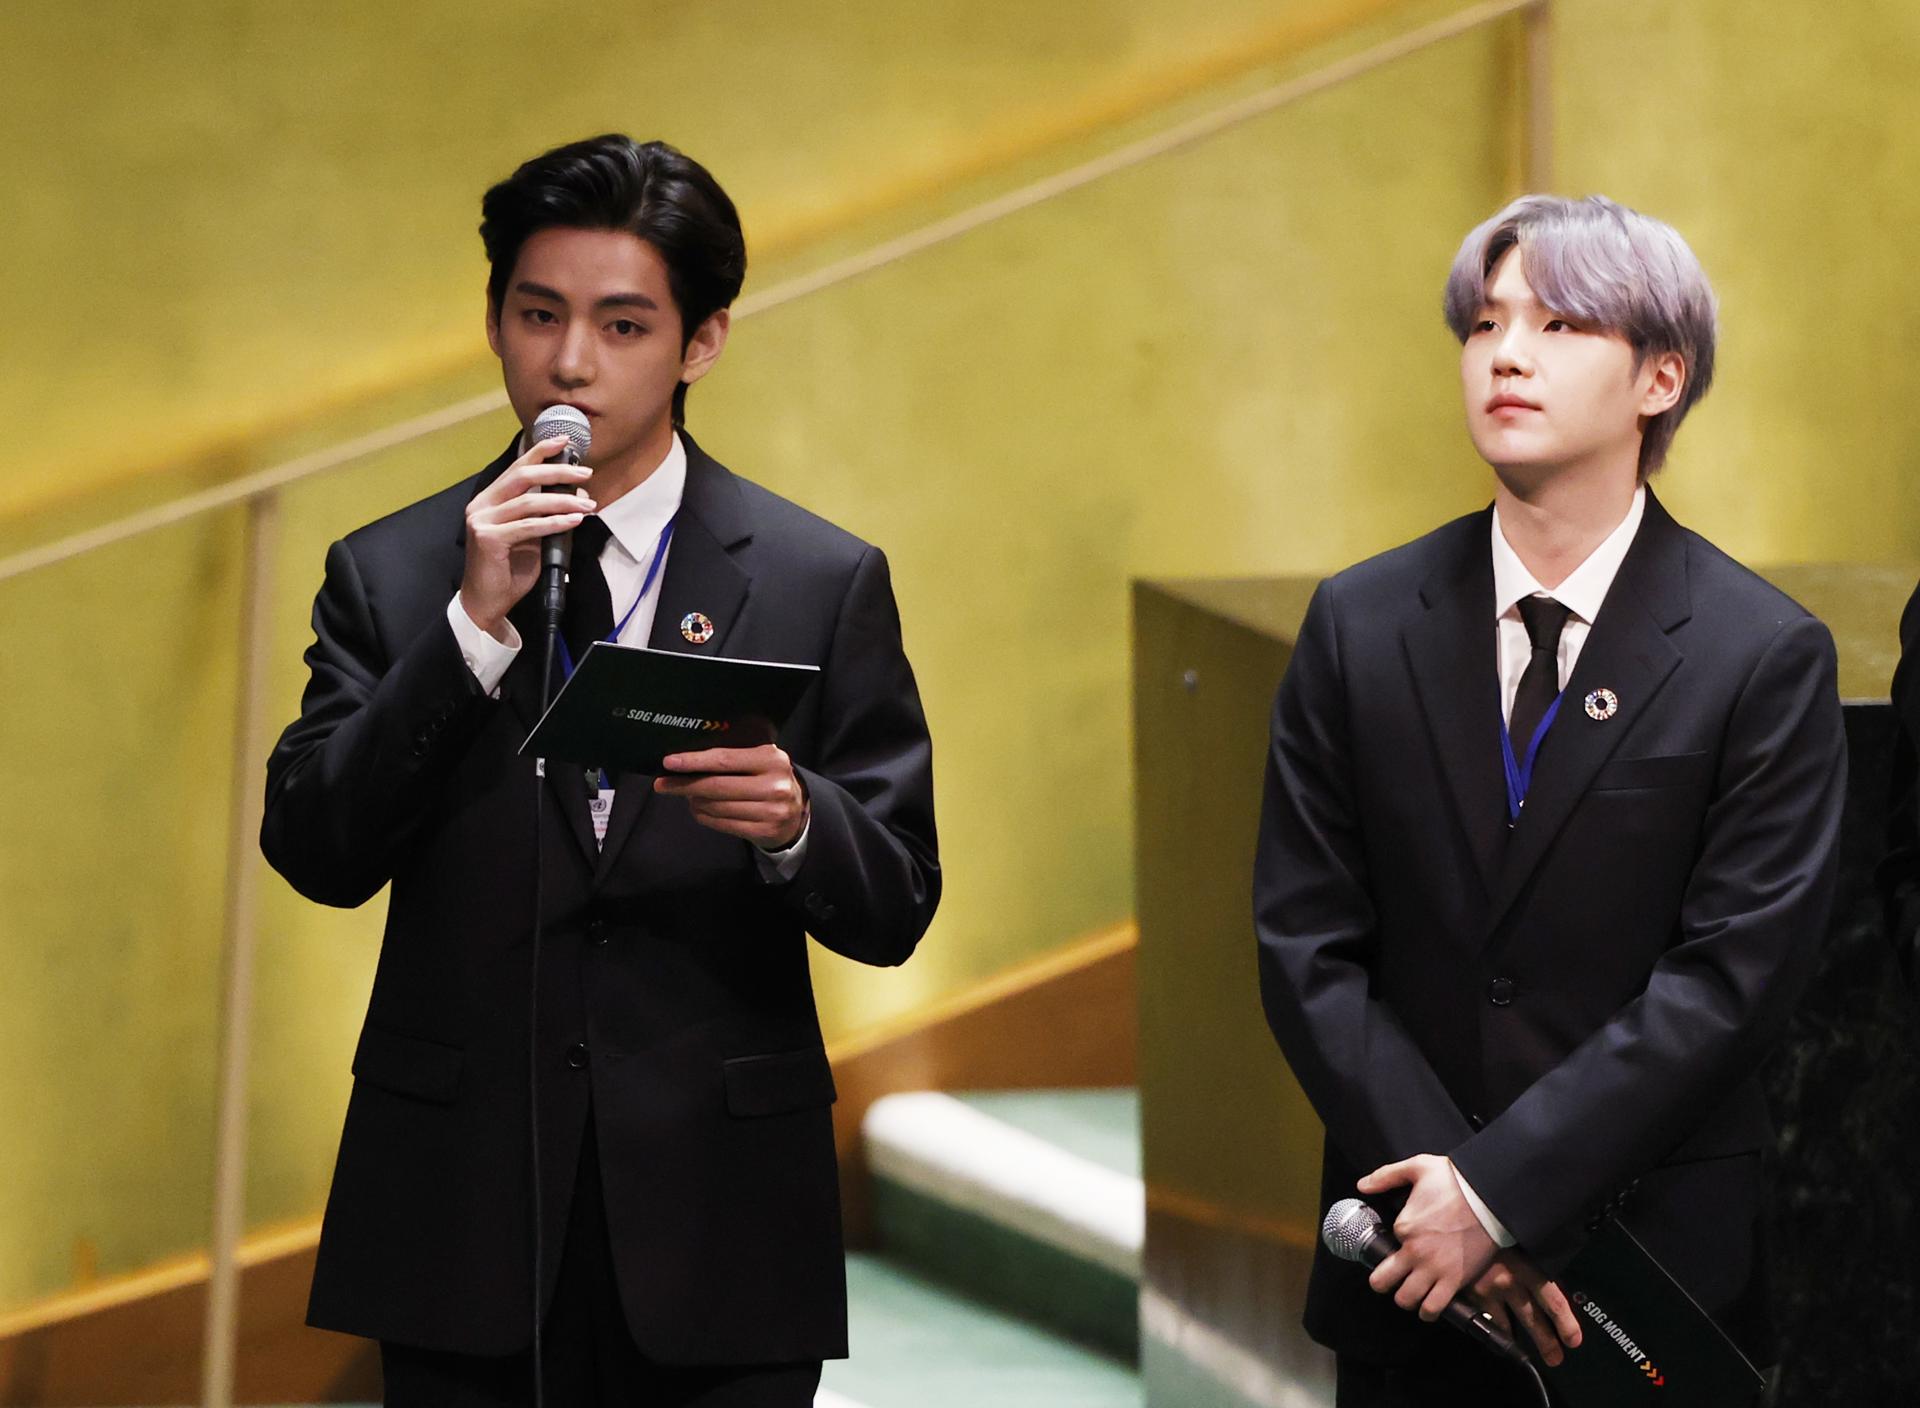 Suga listens as Taehyung/V of South Korean boy band BTS speaks at the SDG Moment event as part of the UN General Assembly at the United Nations Headquarters in New York City, USA, 20 September 2021. EFE/EPA/FILE/JOHN ANGELILLO / POOL